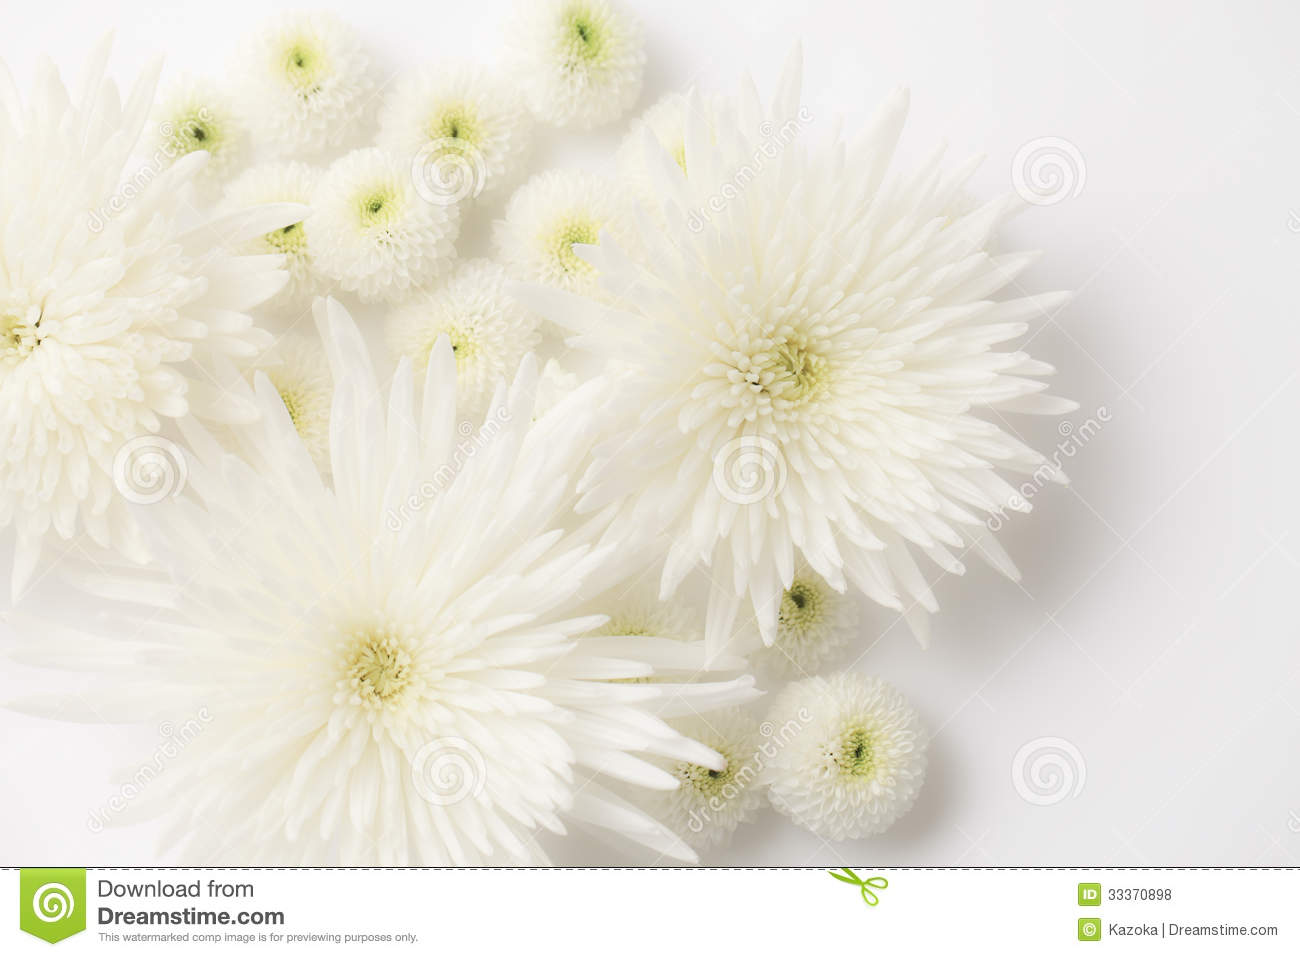 Funeral Flowers Royalty Free Stock Photos   Image  33370898